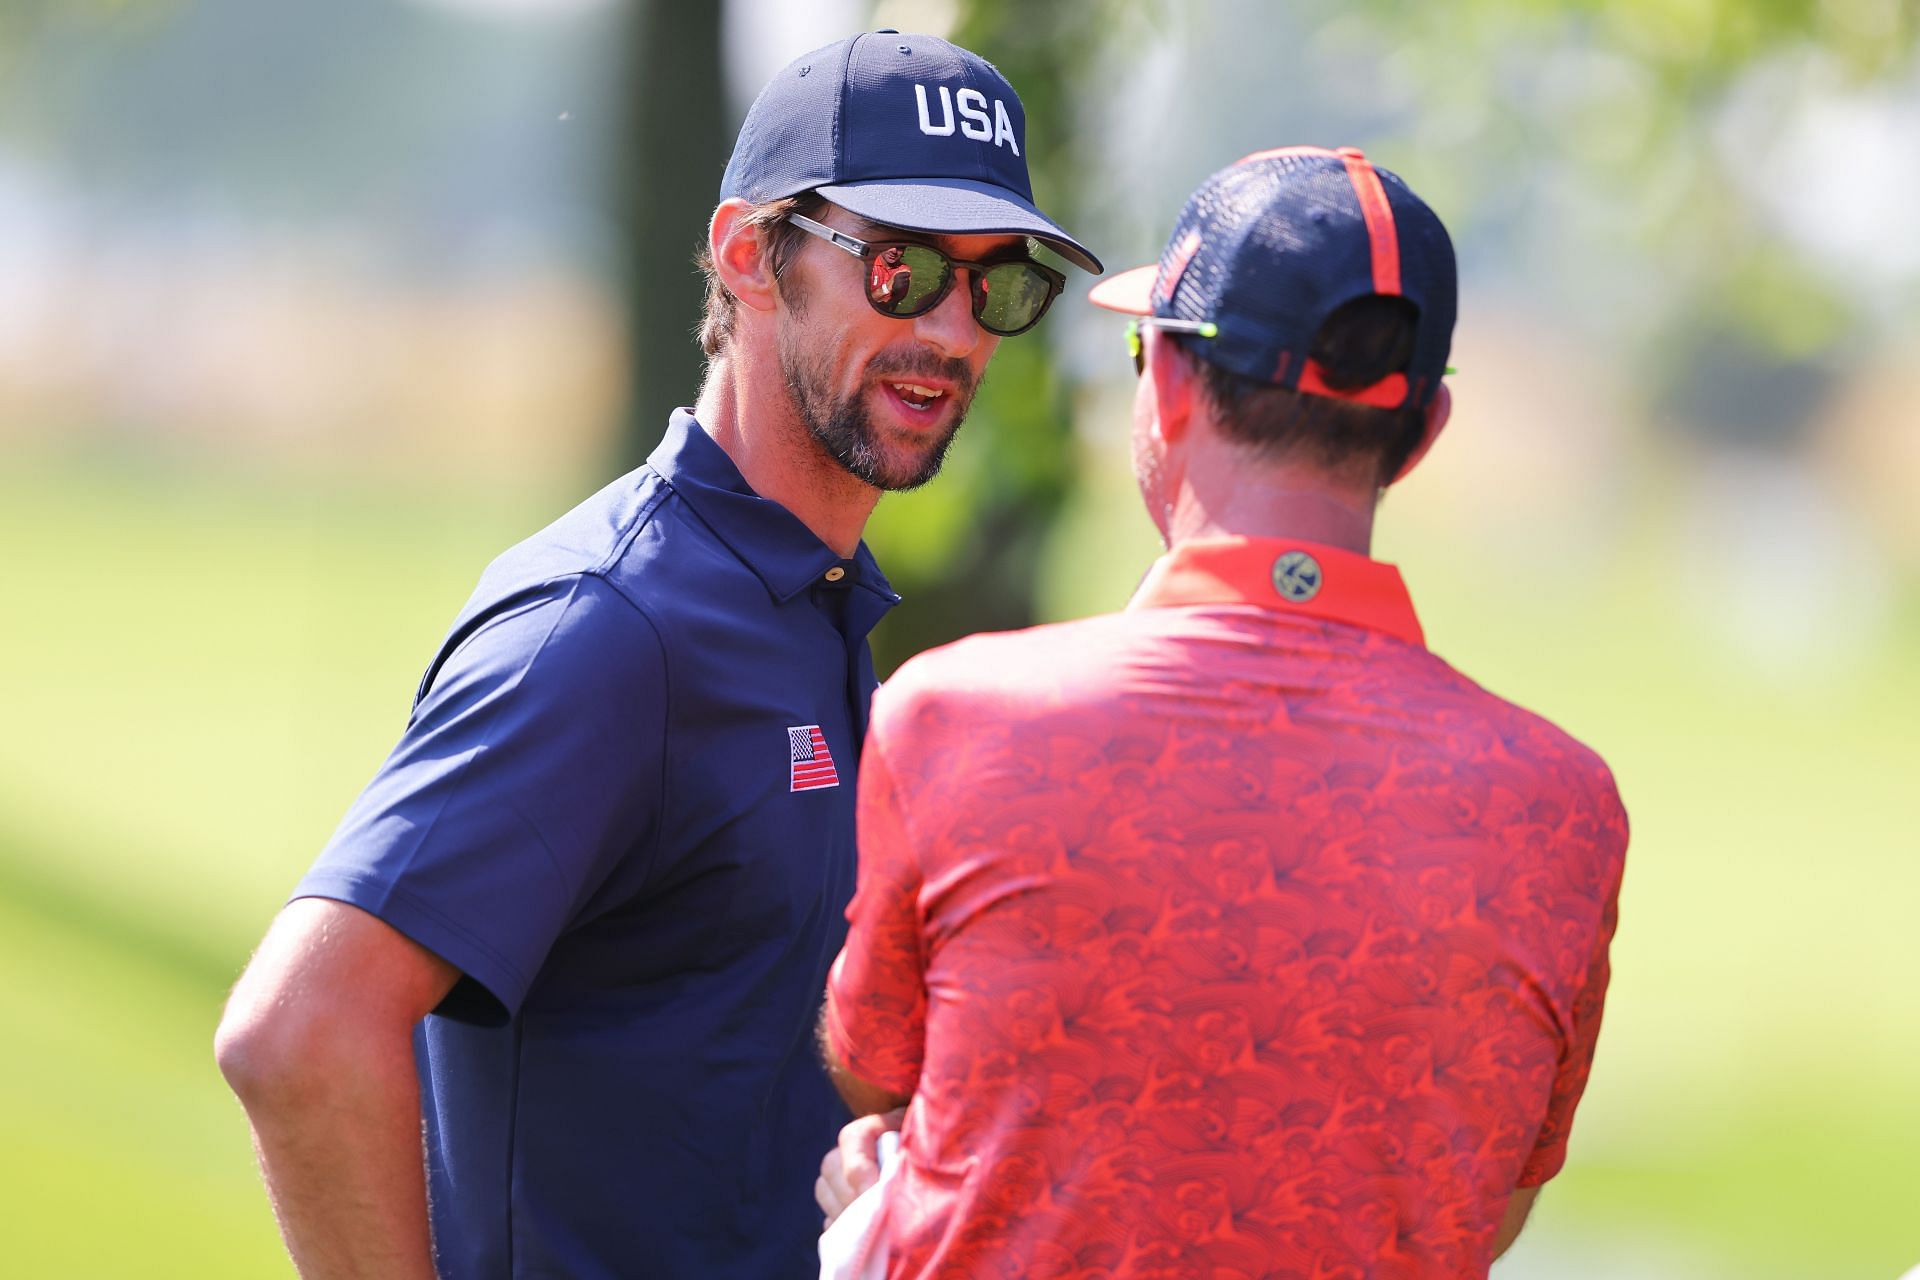 Michael Phelps has become quite the golfer